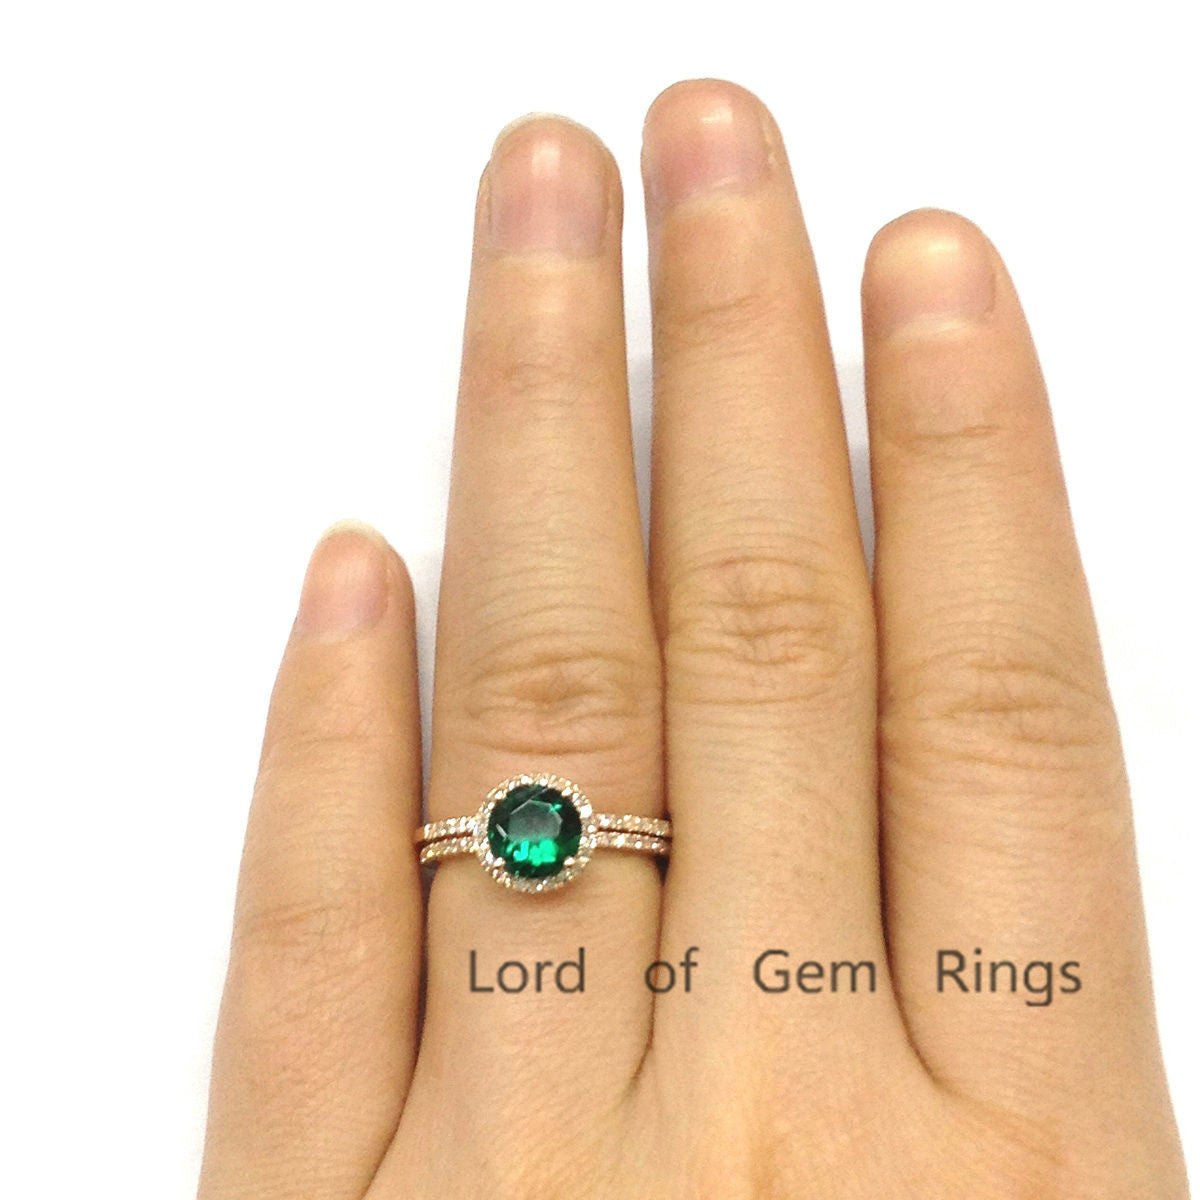 Reserved for Rob, 8mm Round Emerald Engagement Ring 14k Yellow Gold - Lord of Gem Rings